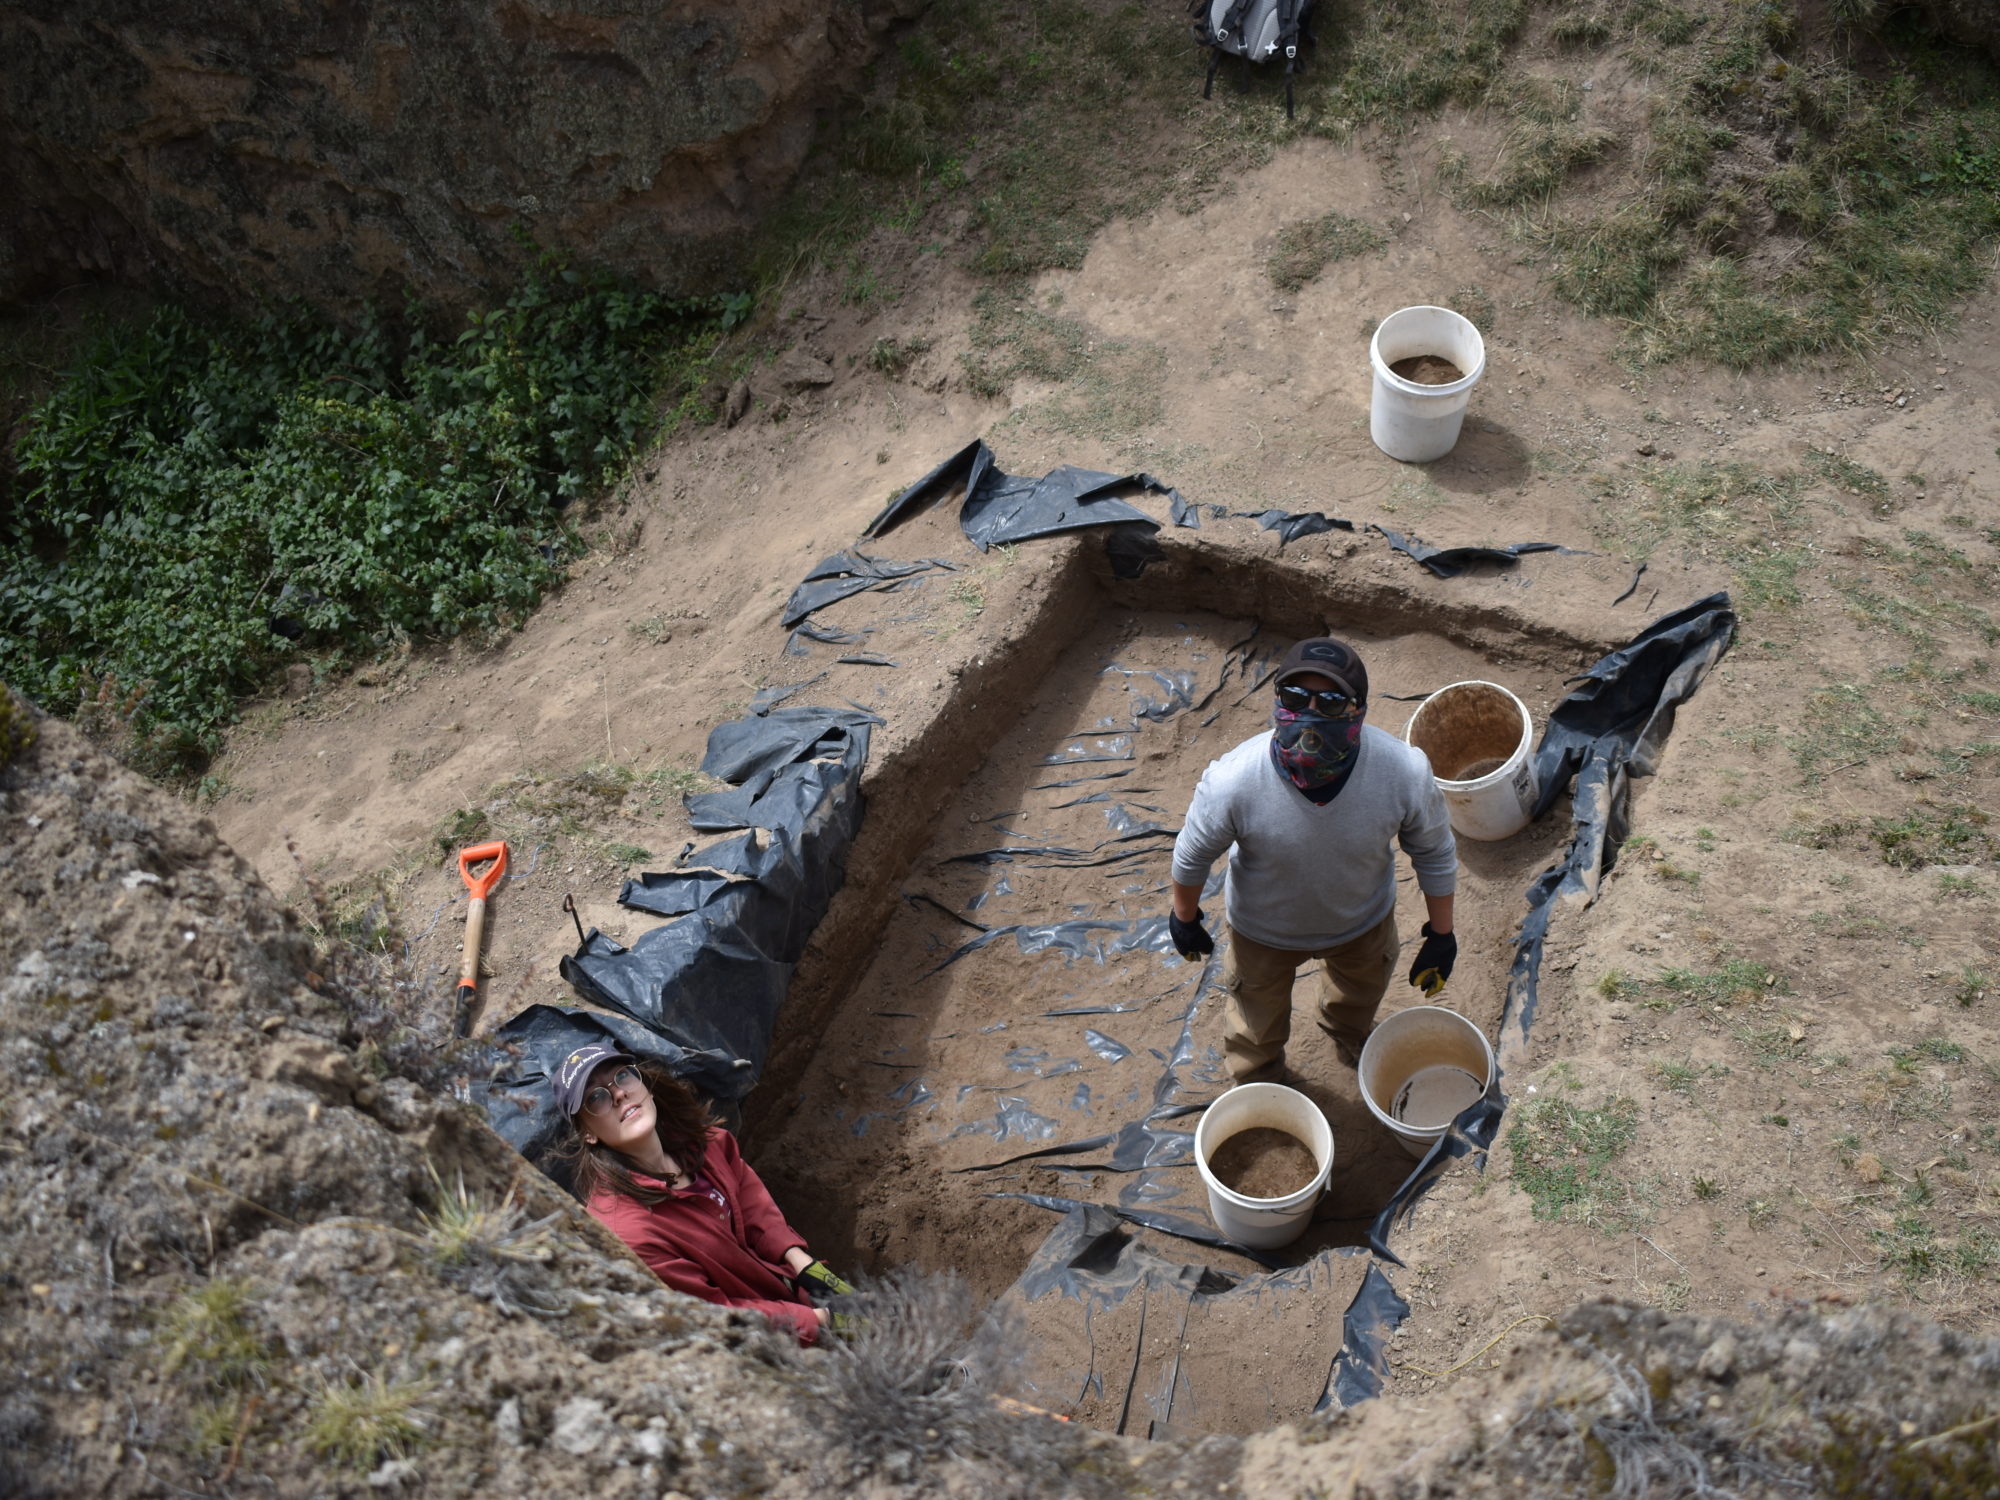 Byron and Clementine remove backfill from a 2018 excavation that was continued in 2019 - Parque Arqueológico Cochasquí